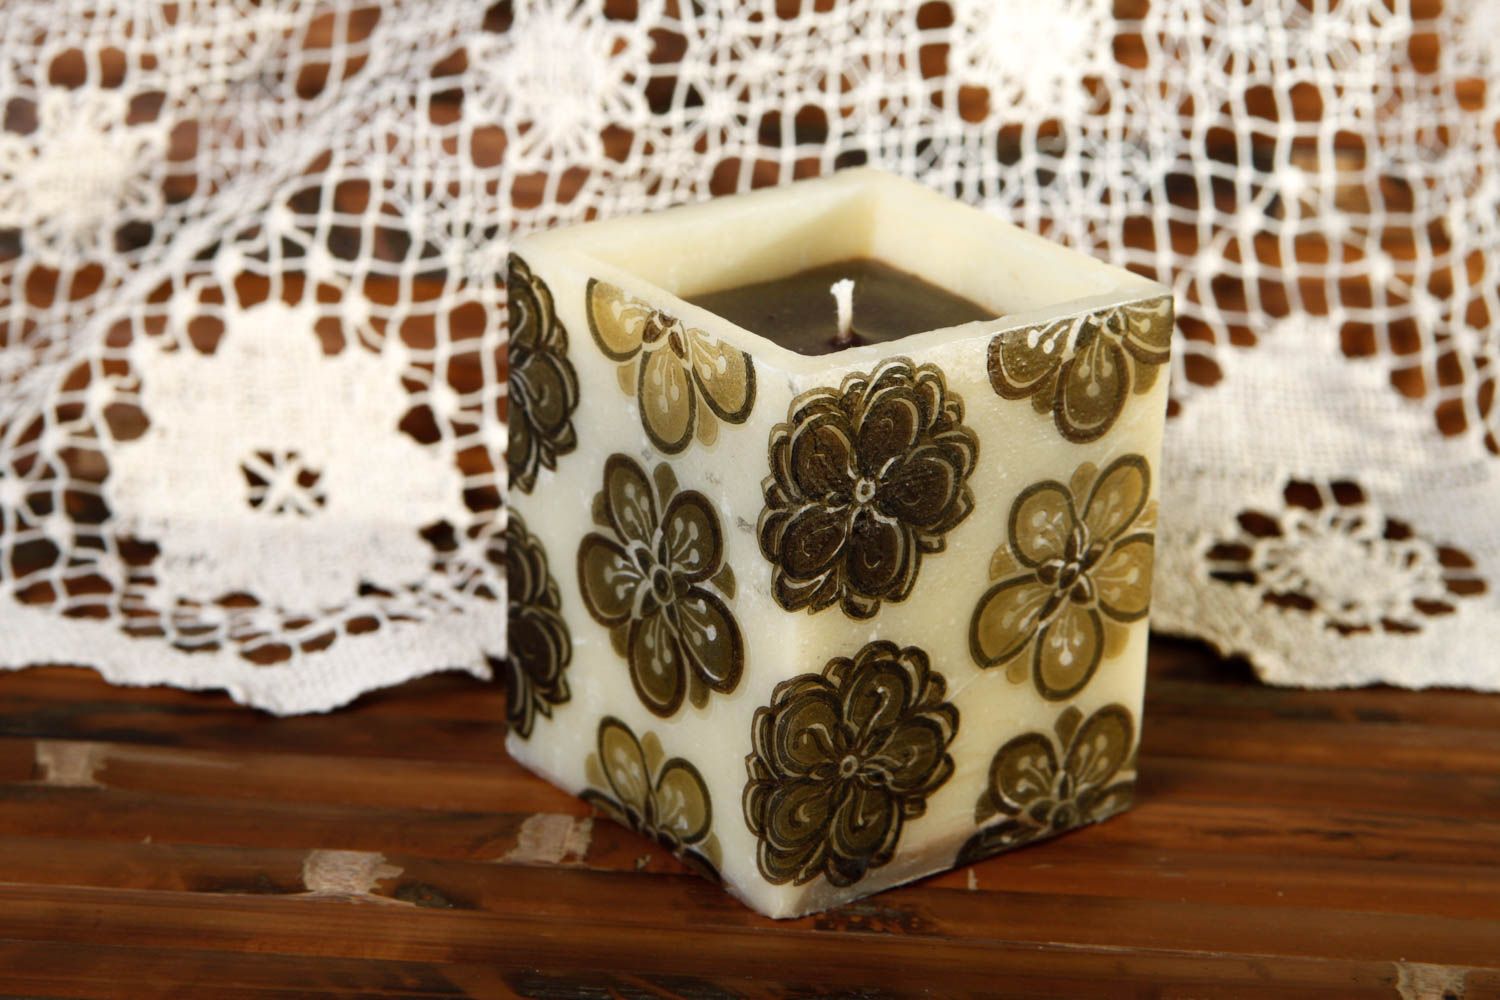 Unusual handmade paraffin candle designs decorative candle cool bedrooms photo 1